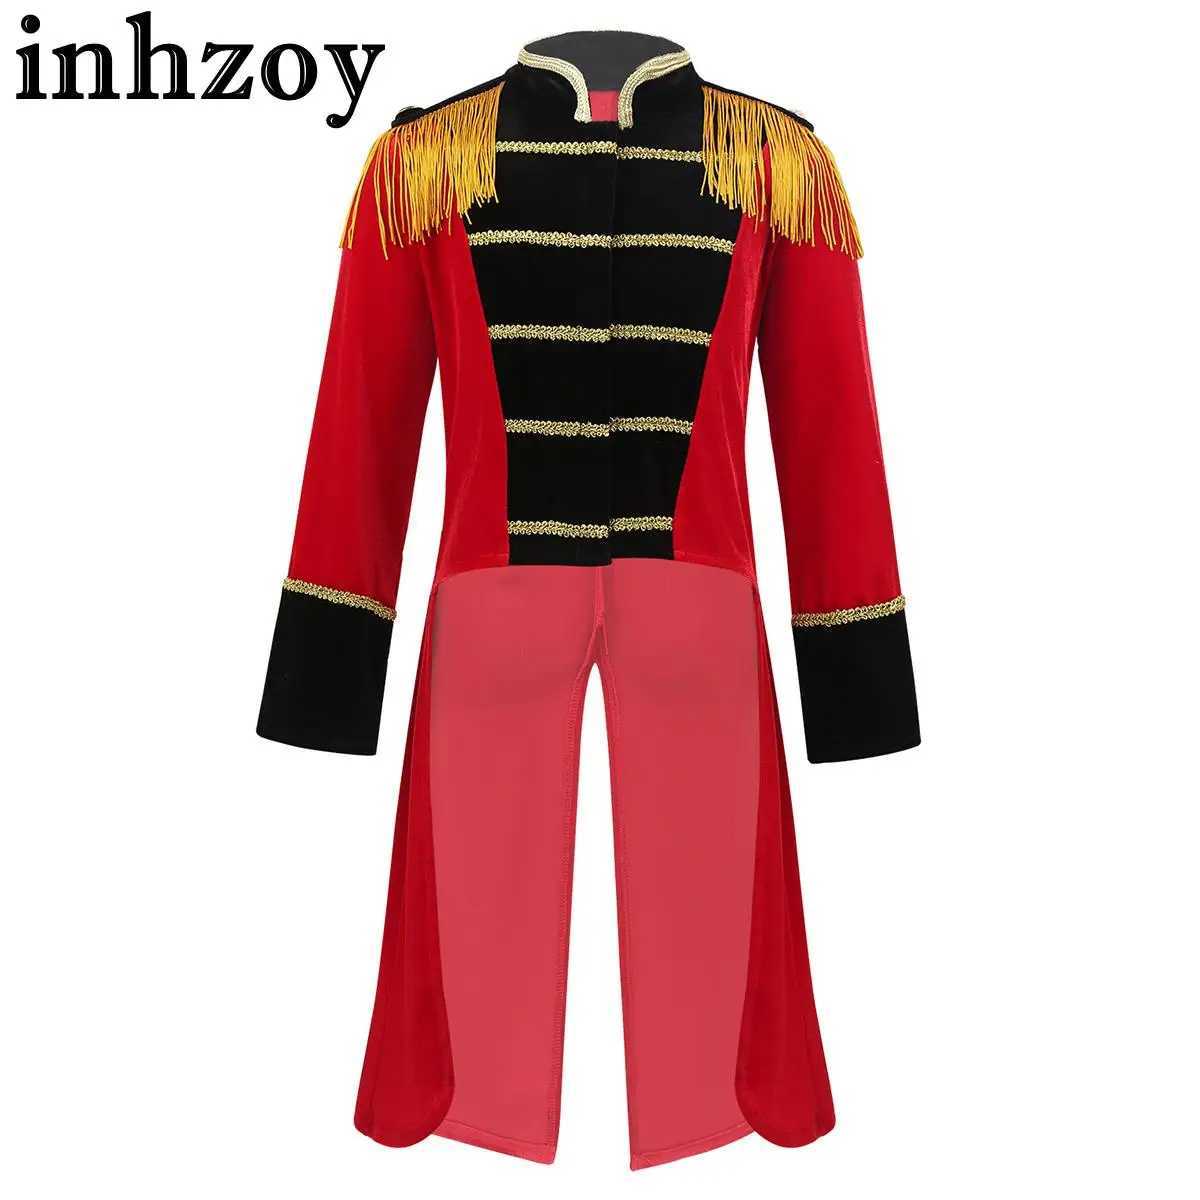 Cosplay Kids Boys Circus Ringmaster Kostüm Halloween Cosplay Party -Outfit Fransen Gold Trimmings Tailcoat Jacke für Performance2405